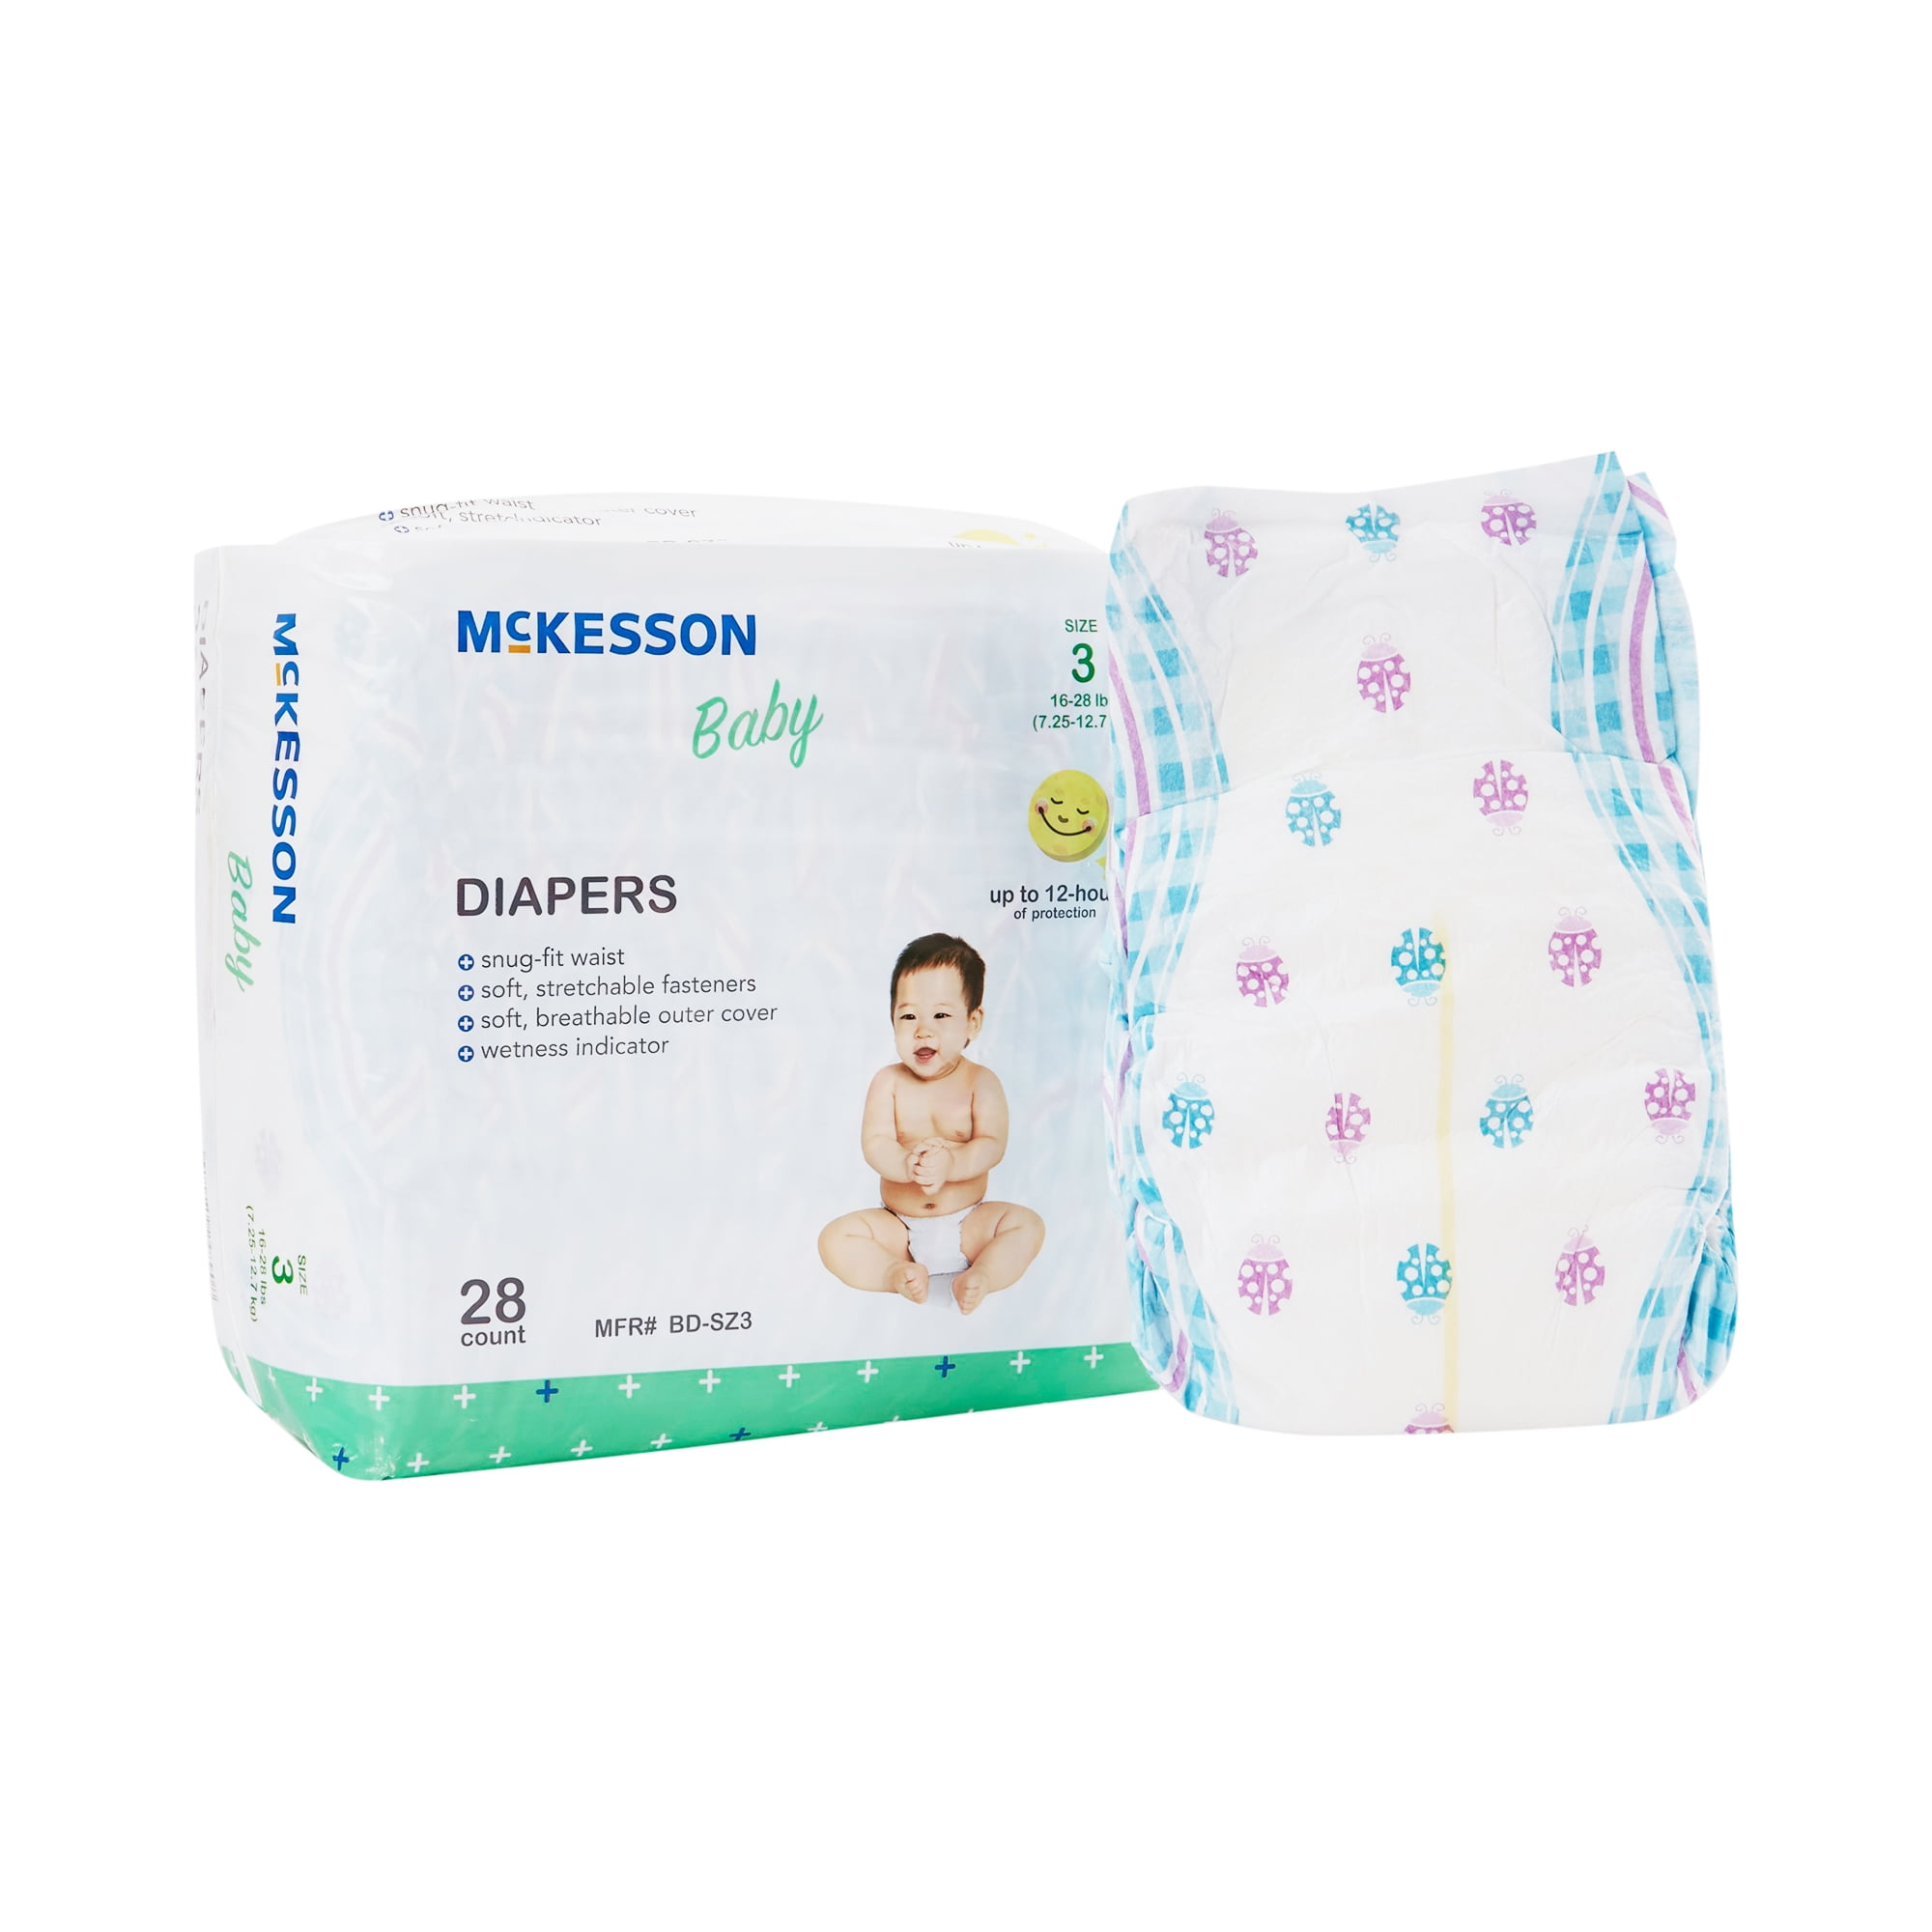 McKesson Baby Baby Diaper Size 3, 16 to 28 lbs. BD-SZ3, 28 Ct 